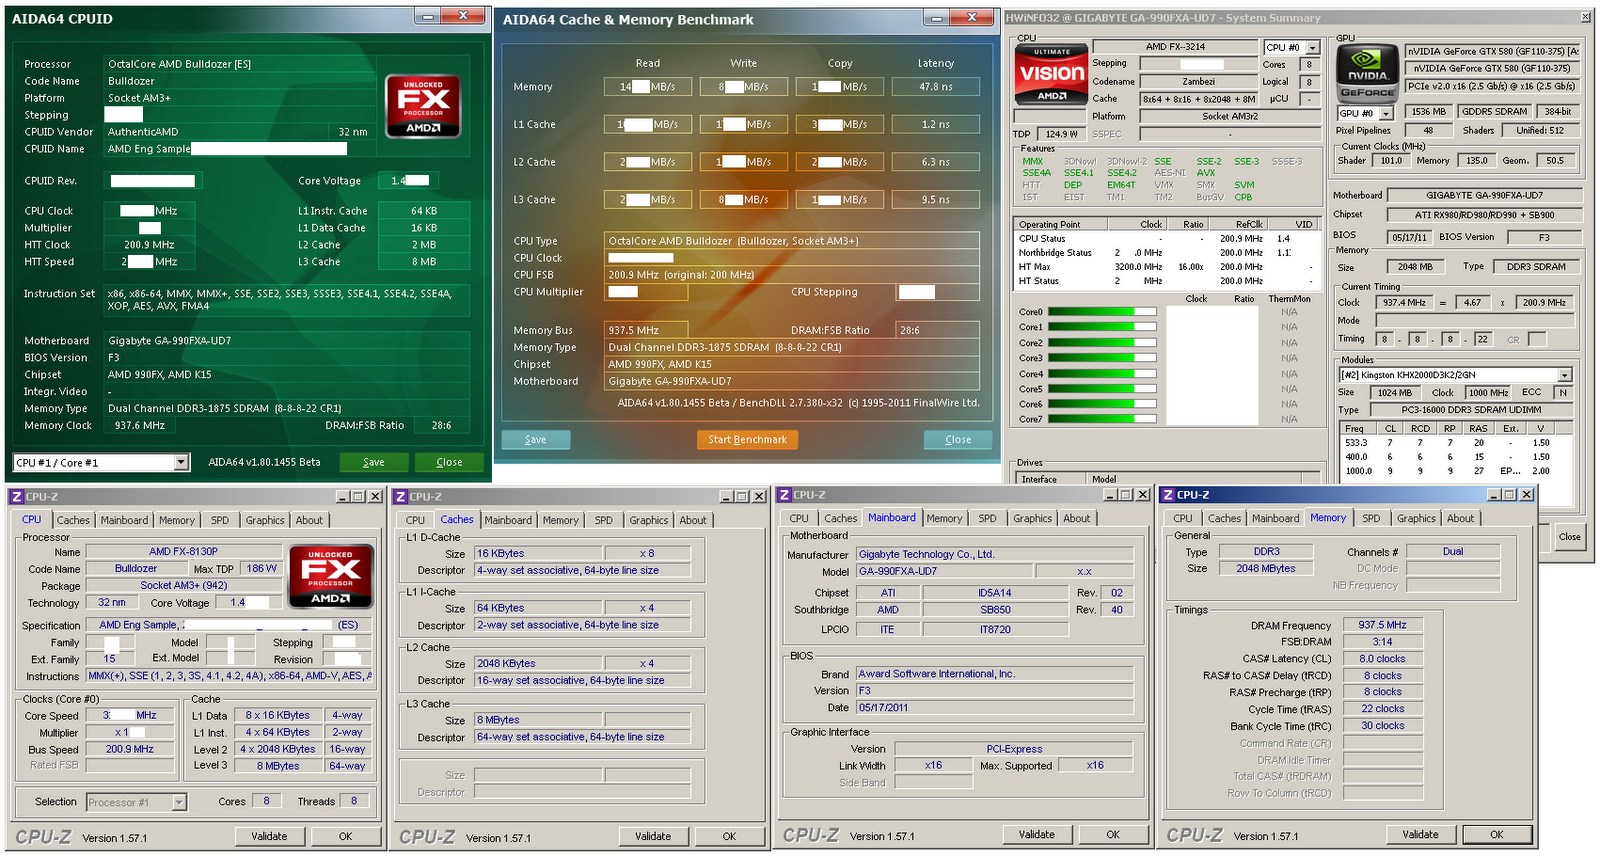 Media asset in full size related to 3dfxzone.it news item entitled as follows: Foto e benchmark della cpu a 8 core Bulldozer di AMD | Image Name: news15282_2.png